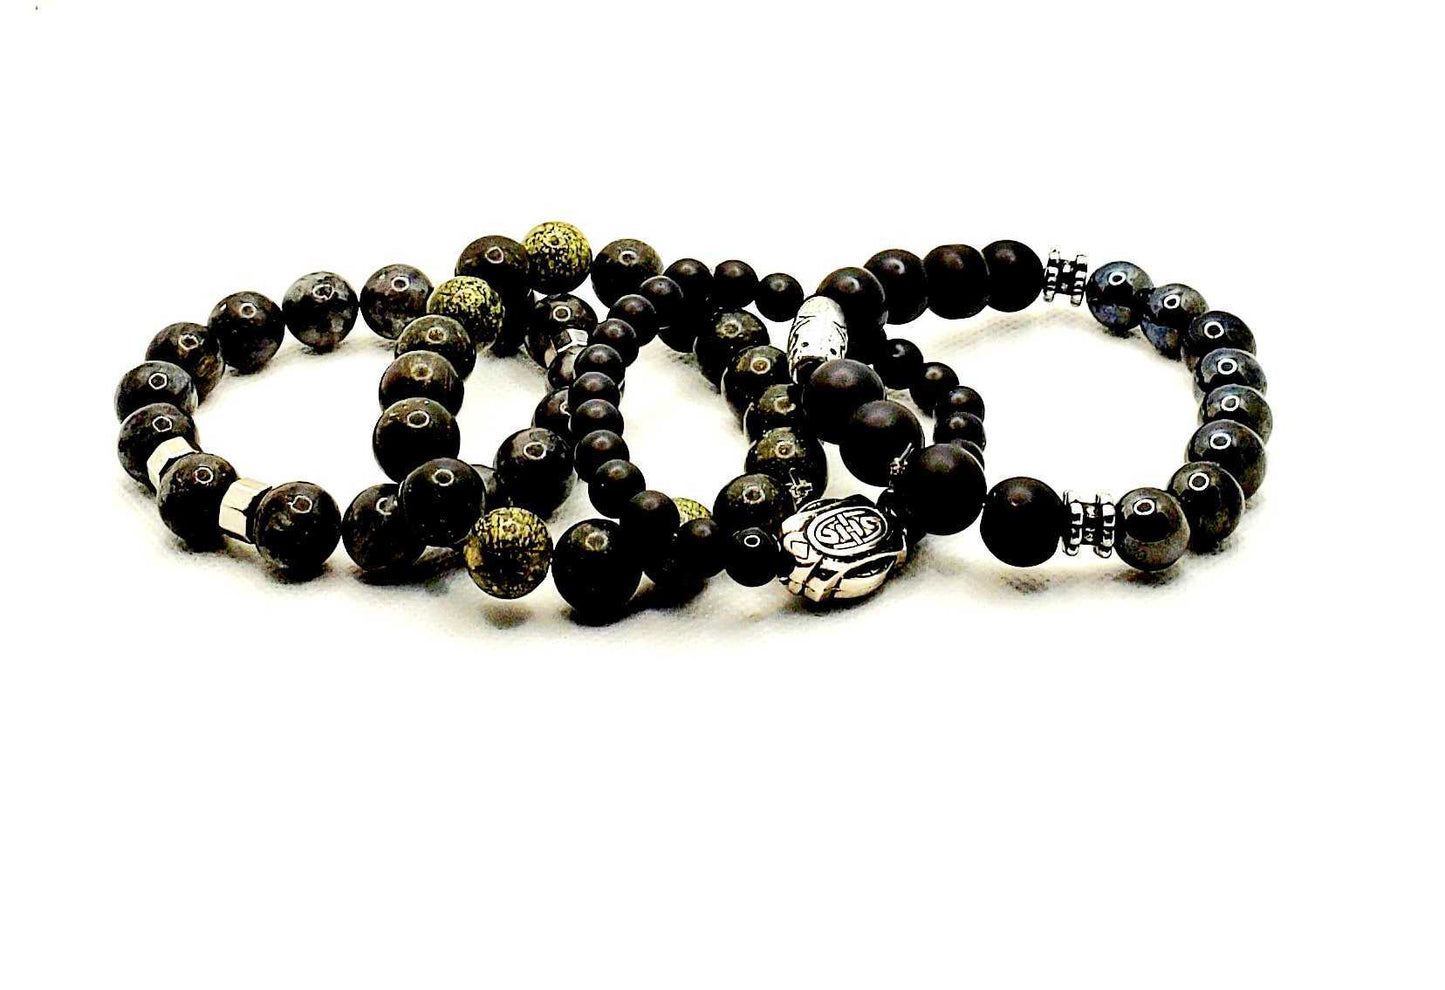 HEALING HANDS Accessories-FOR HIM (Men's Collection)